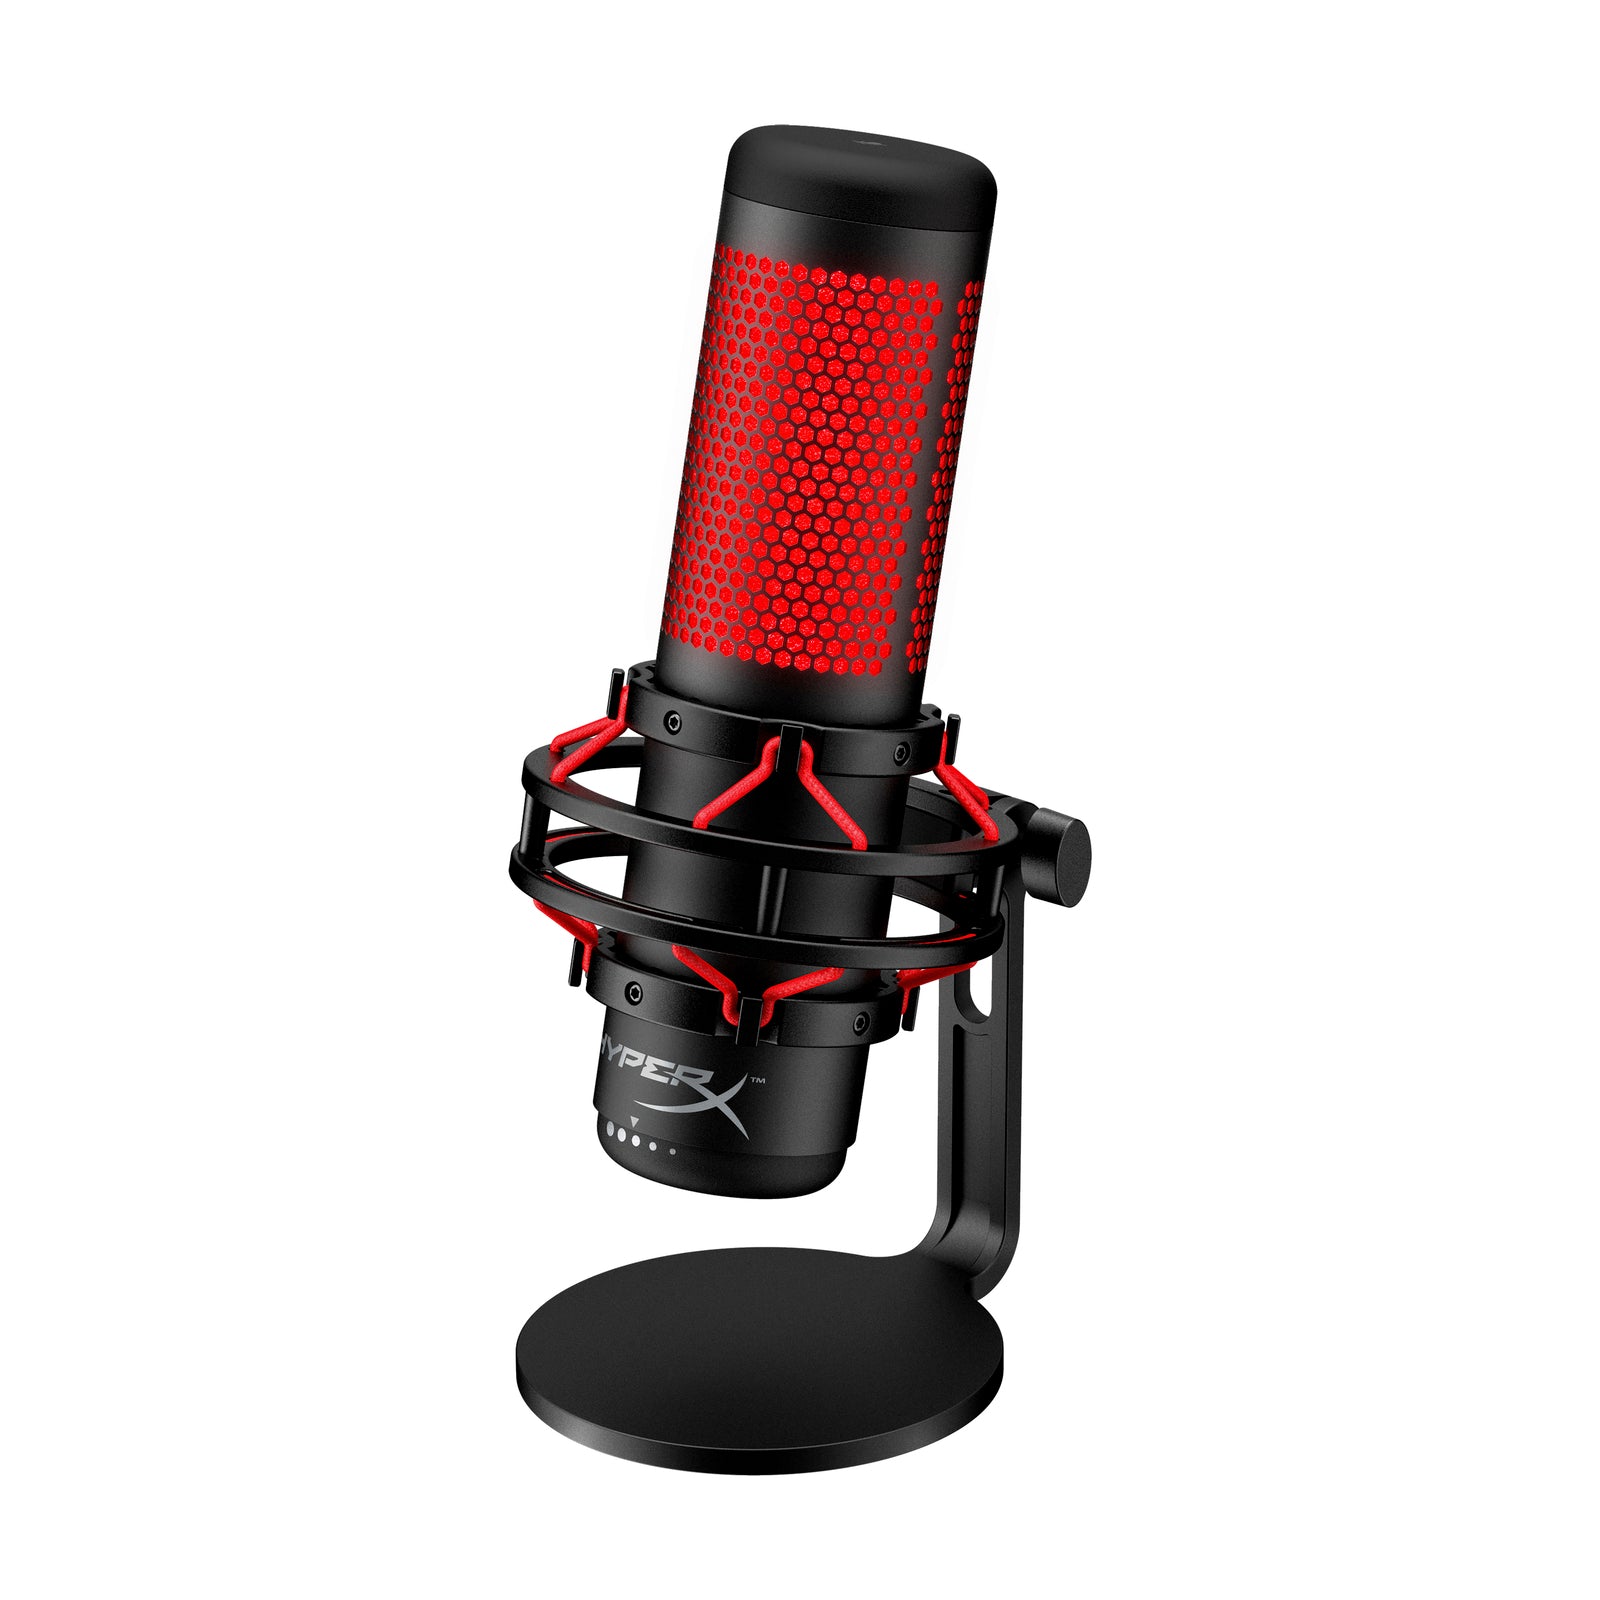 angled side View of HyperX Quadcast USB Microphone with red lighting